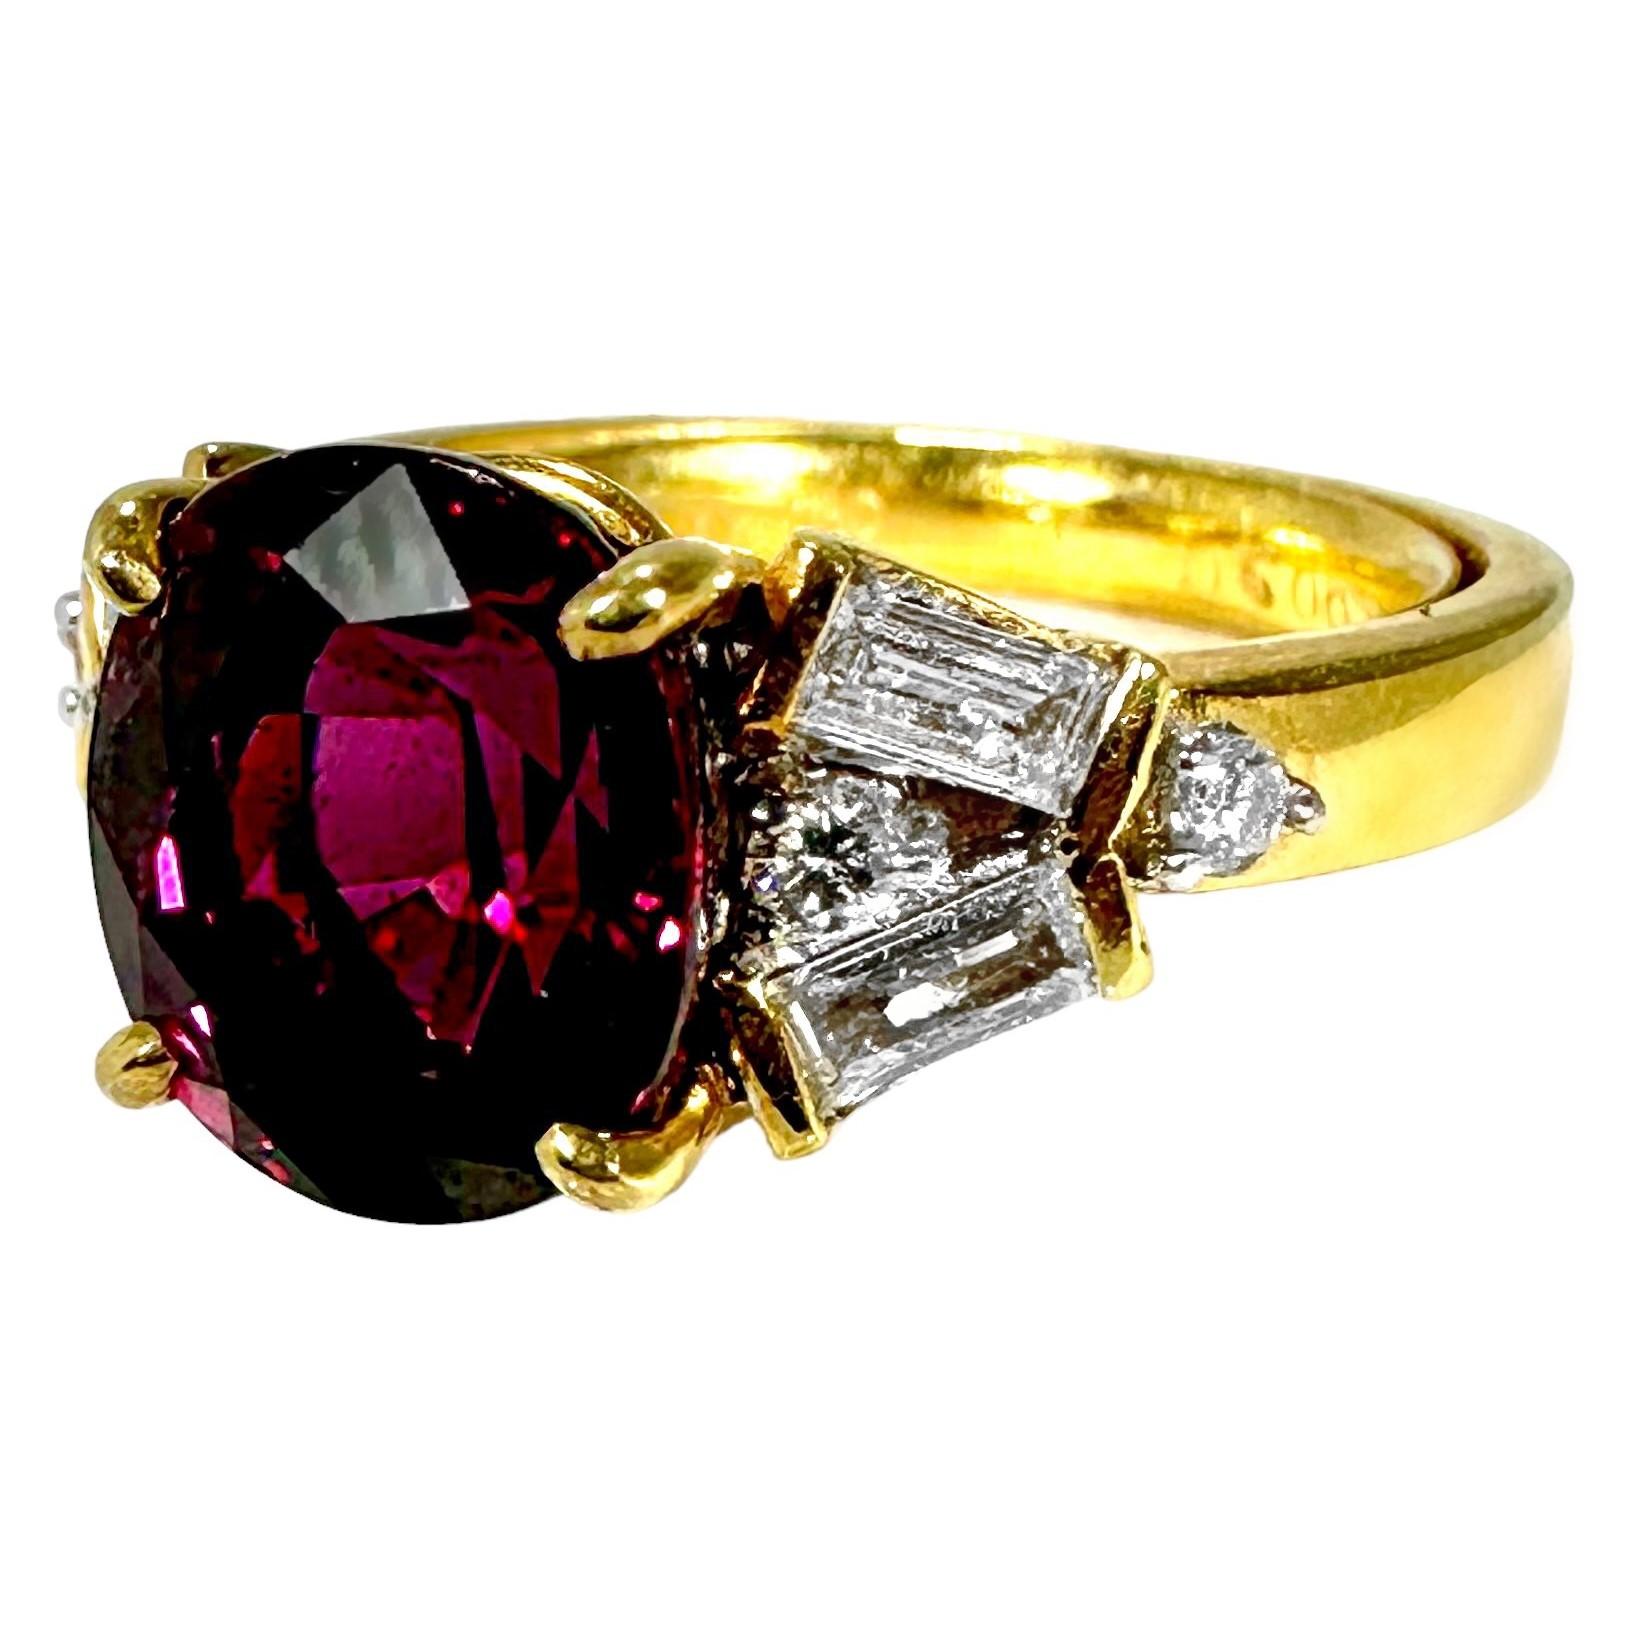 18k Yellow Gold Ring with 4.76ct Red Wine Colored, Oval Shaped Garnet & Diamonds For Sale 2